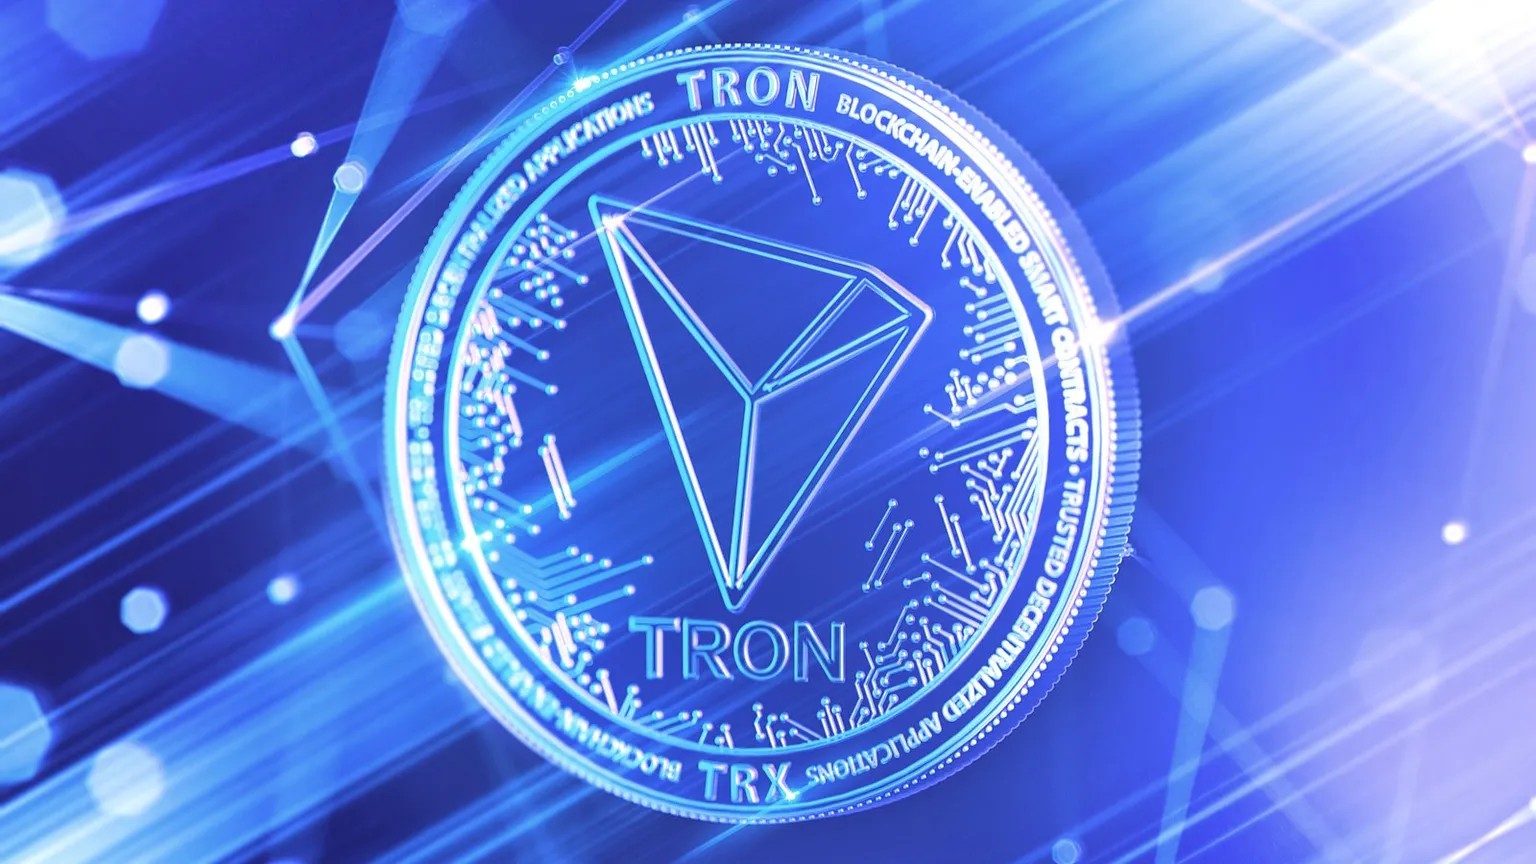 Tron is a decentralized operating system based on blockchain and the TRX cryptocurrency (Image: Shutterstock)